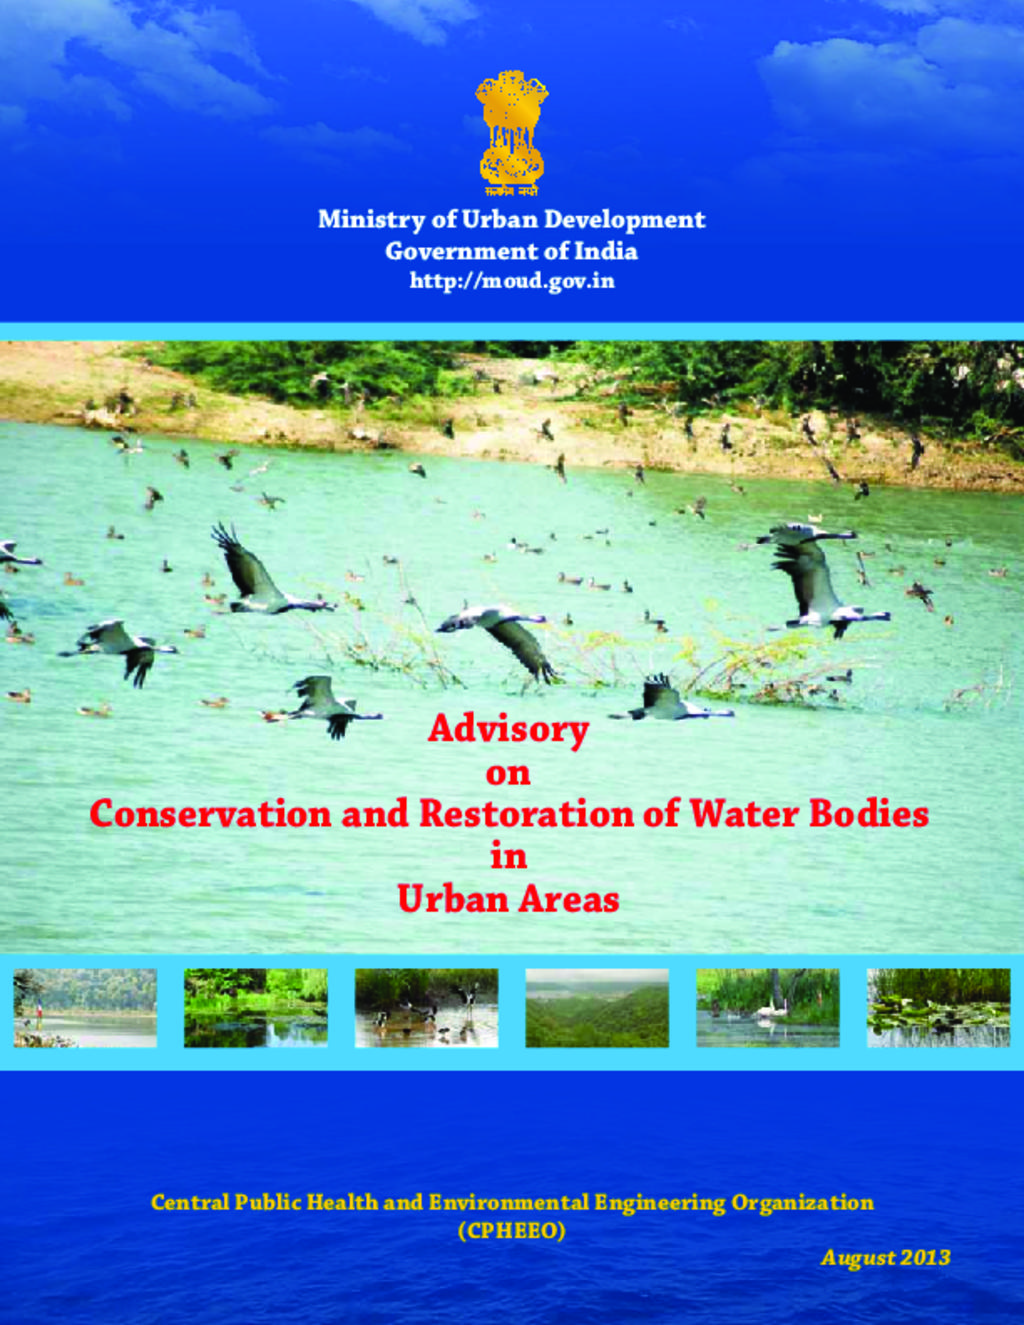 Conservation and Restoration of Water Bodies in Urban Areas